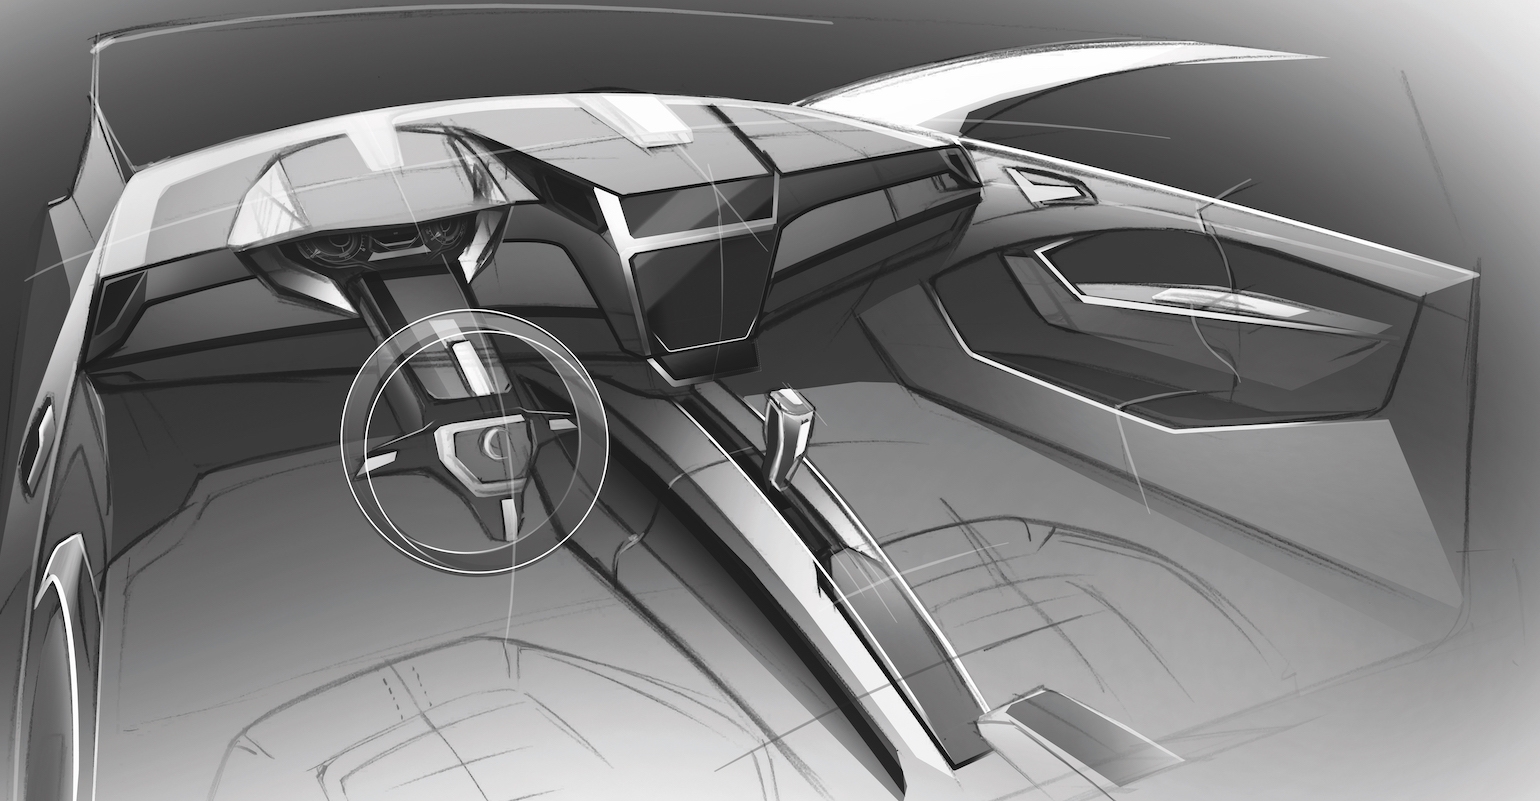 Discover more than 155 automotive interior sketches latest